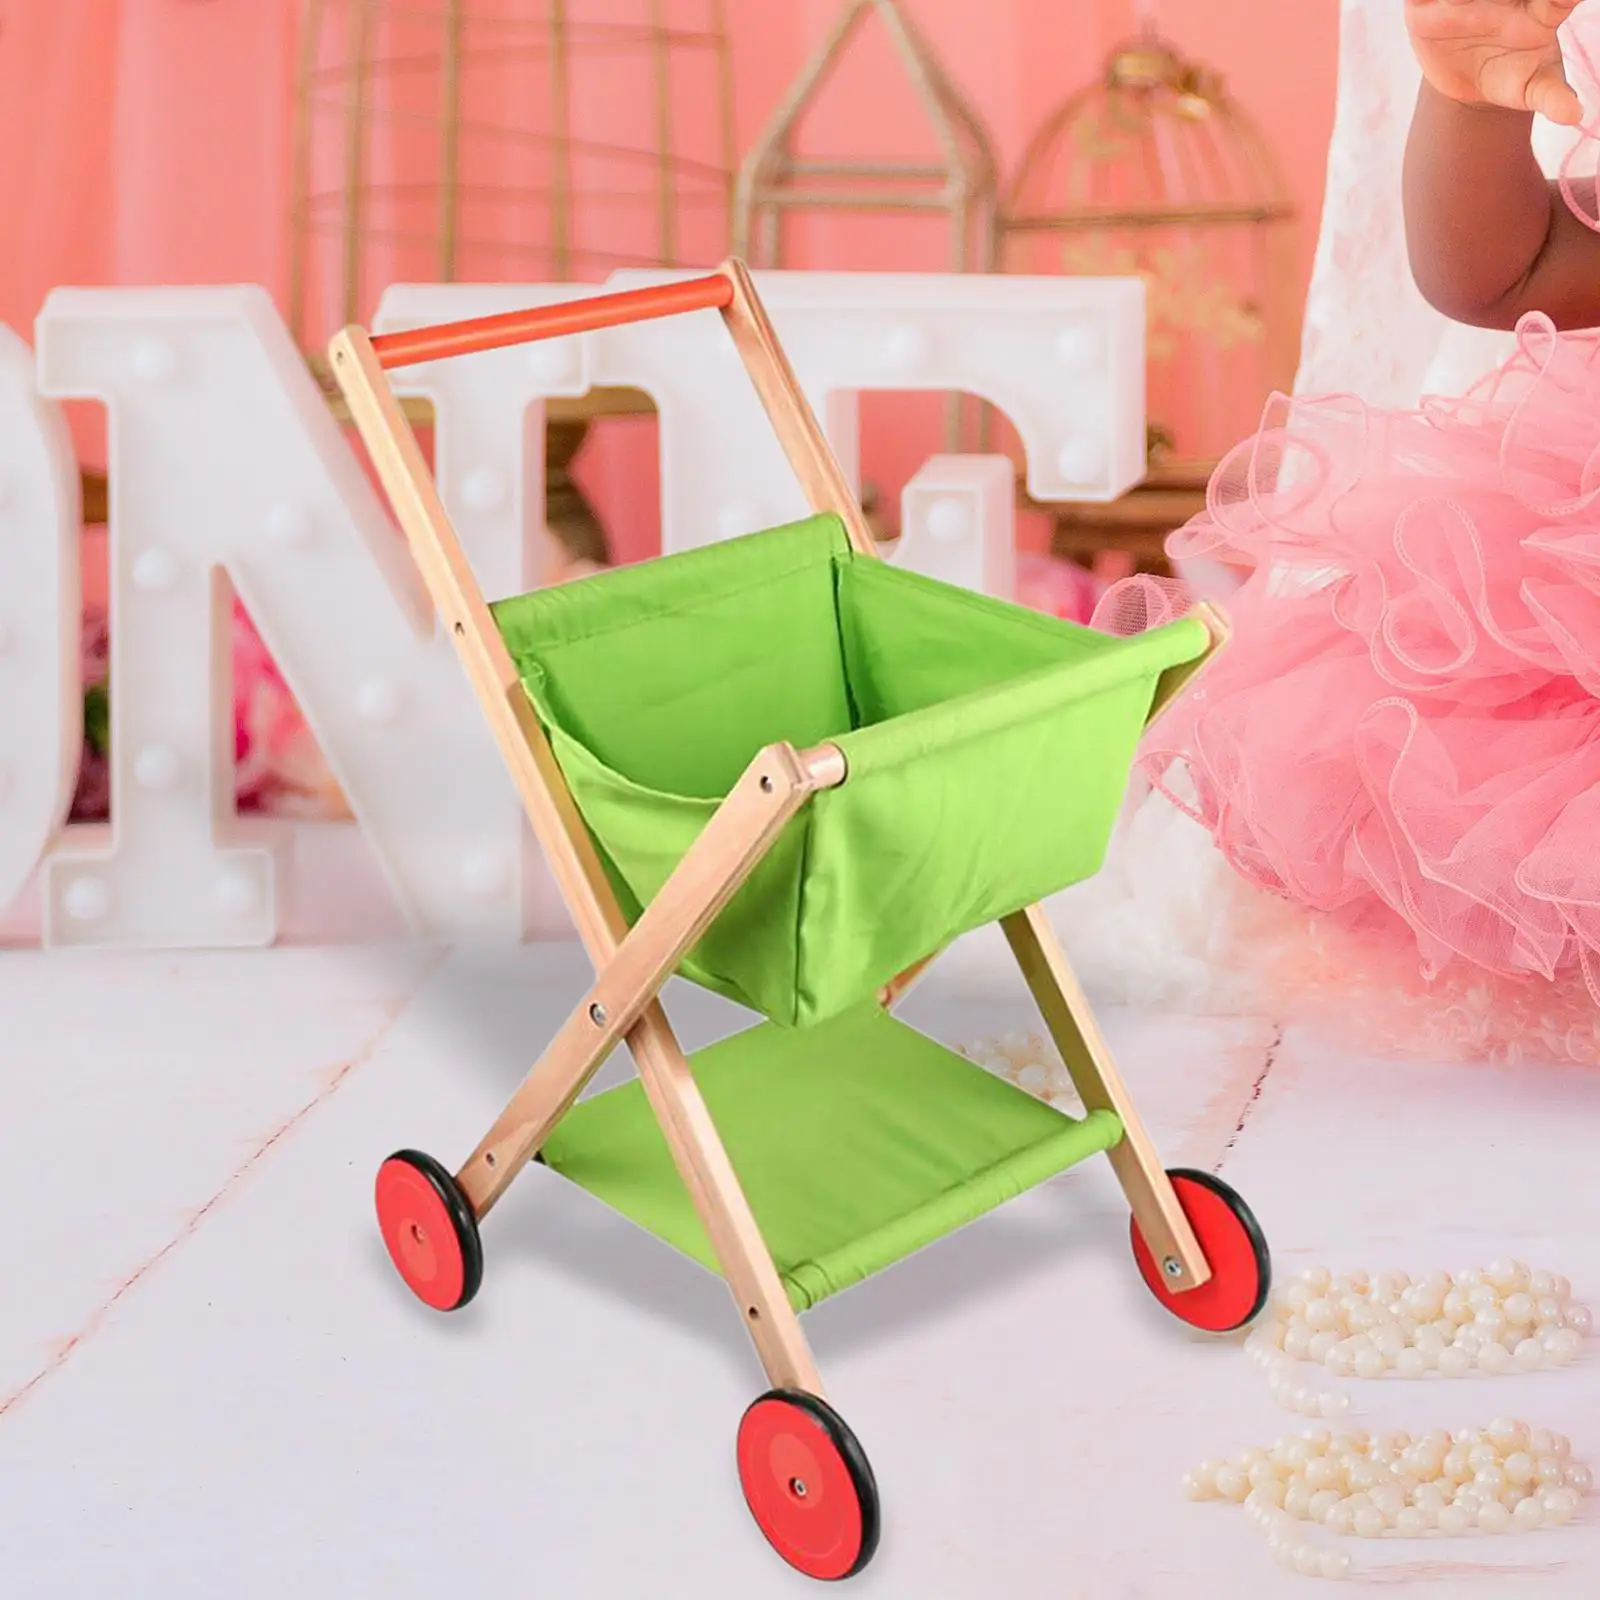 Wooden Shopping Cart ,Perfect Role Play Toy, Promotes Creativity and Imagination for Girls Boys